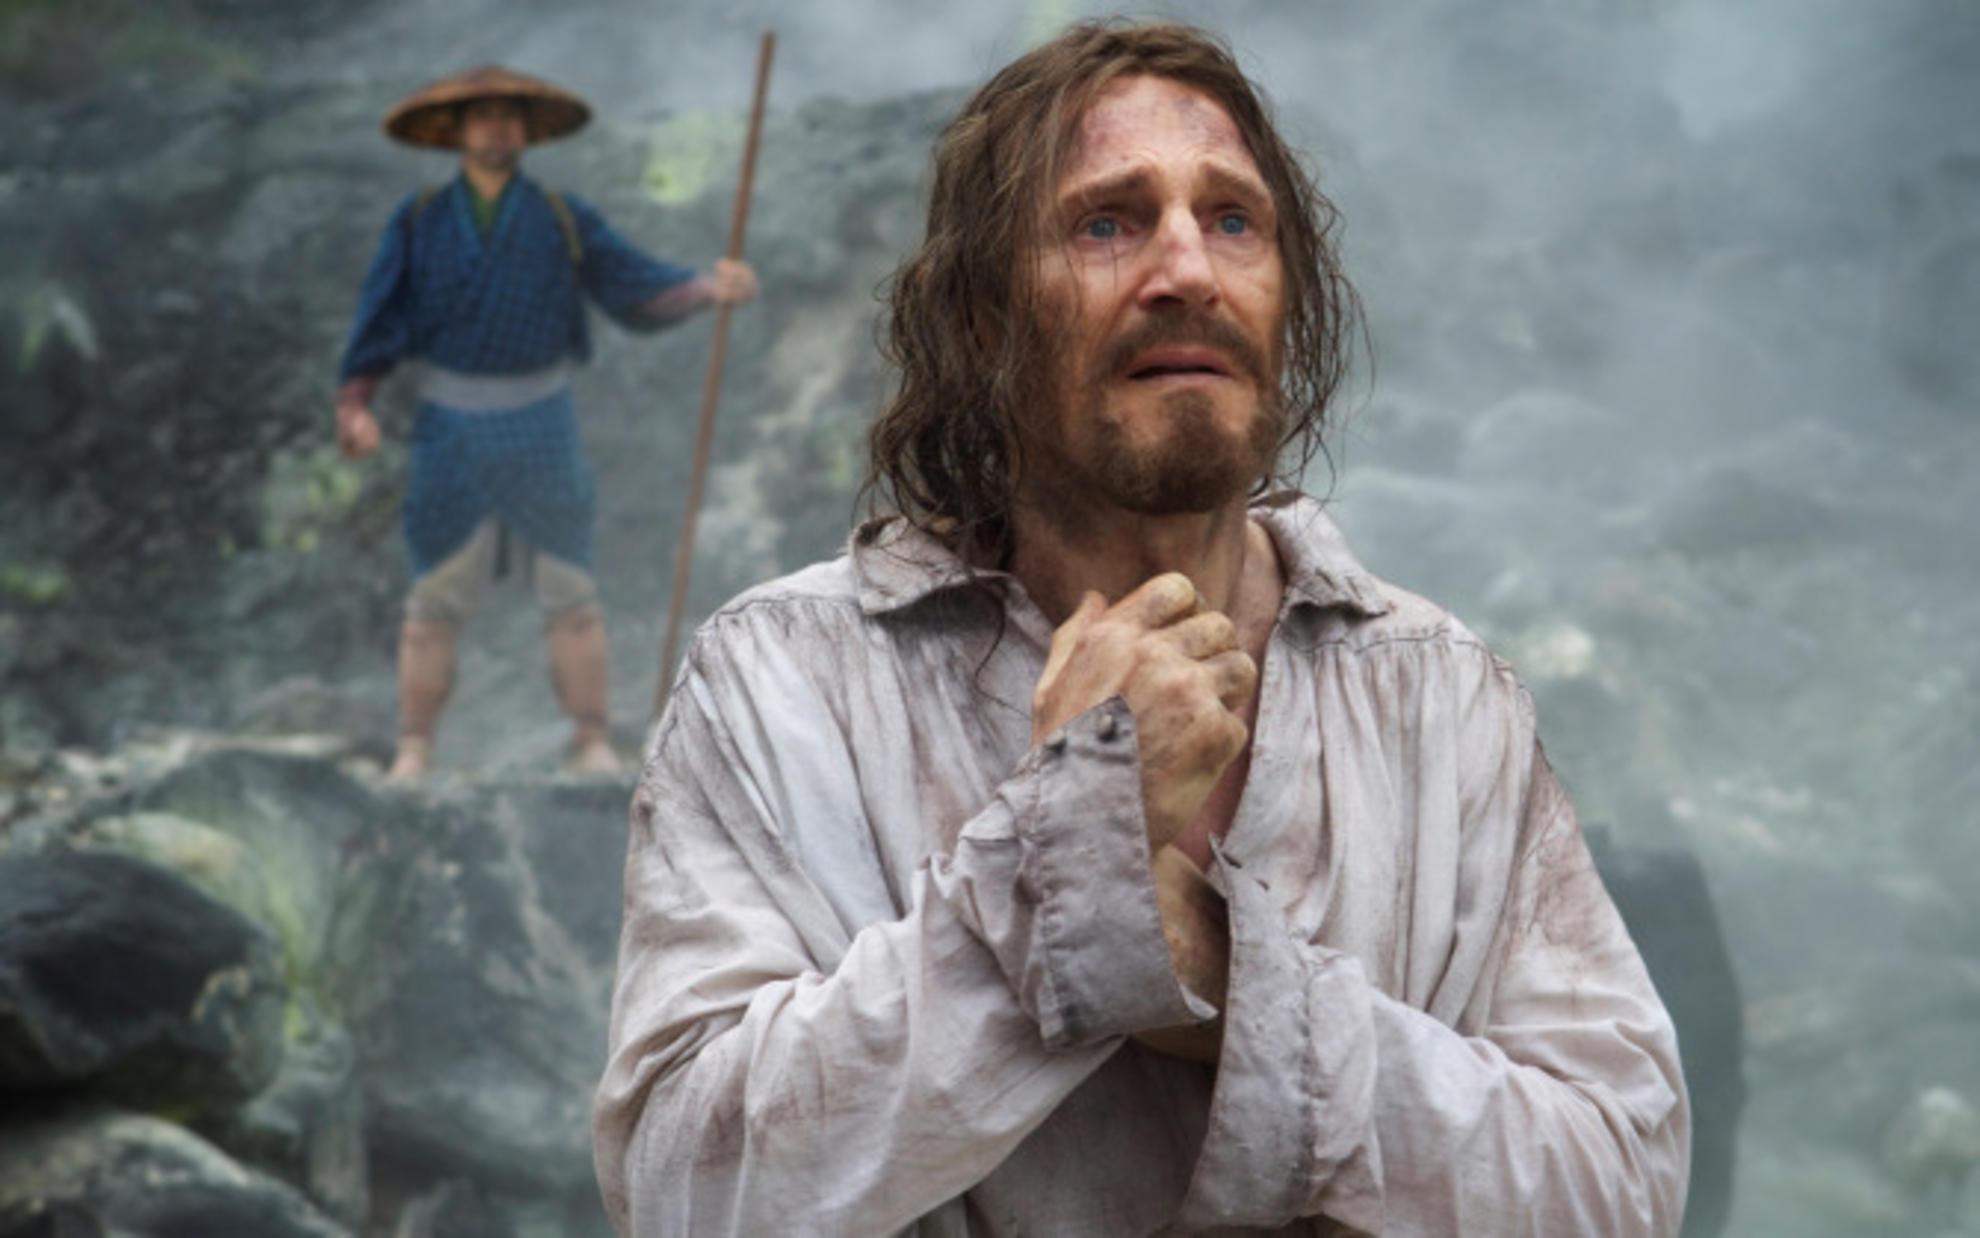 Liam Neeson in ‘Silence’, a film that was a passion project for director Scorsese